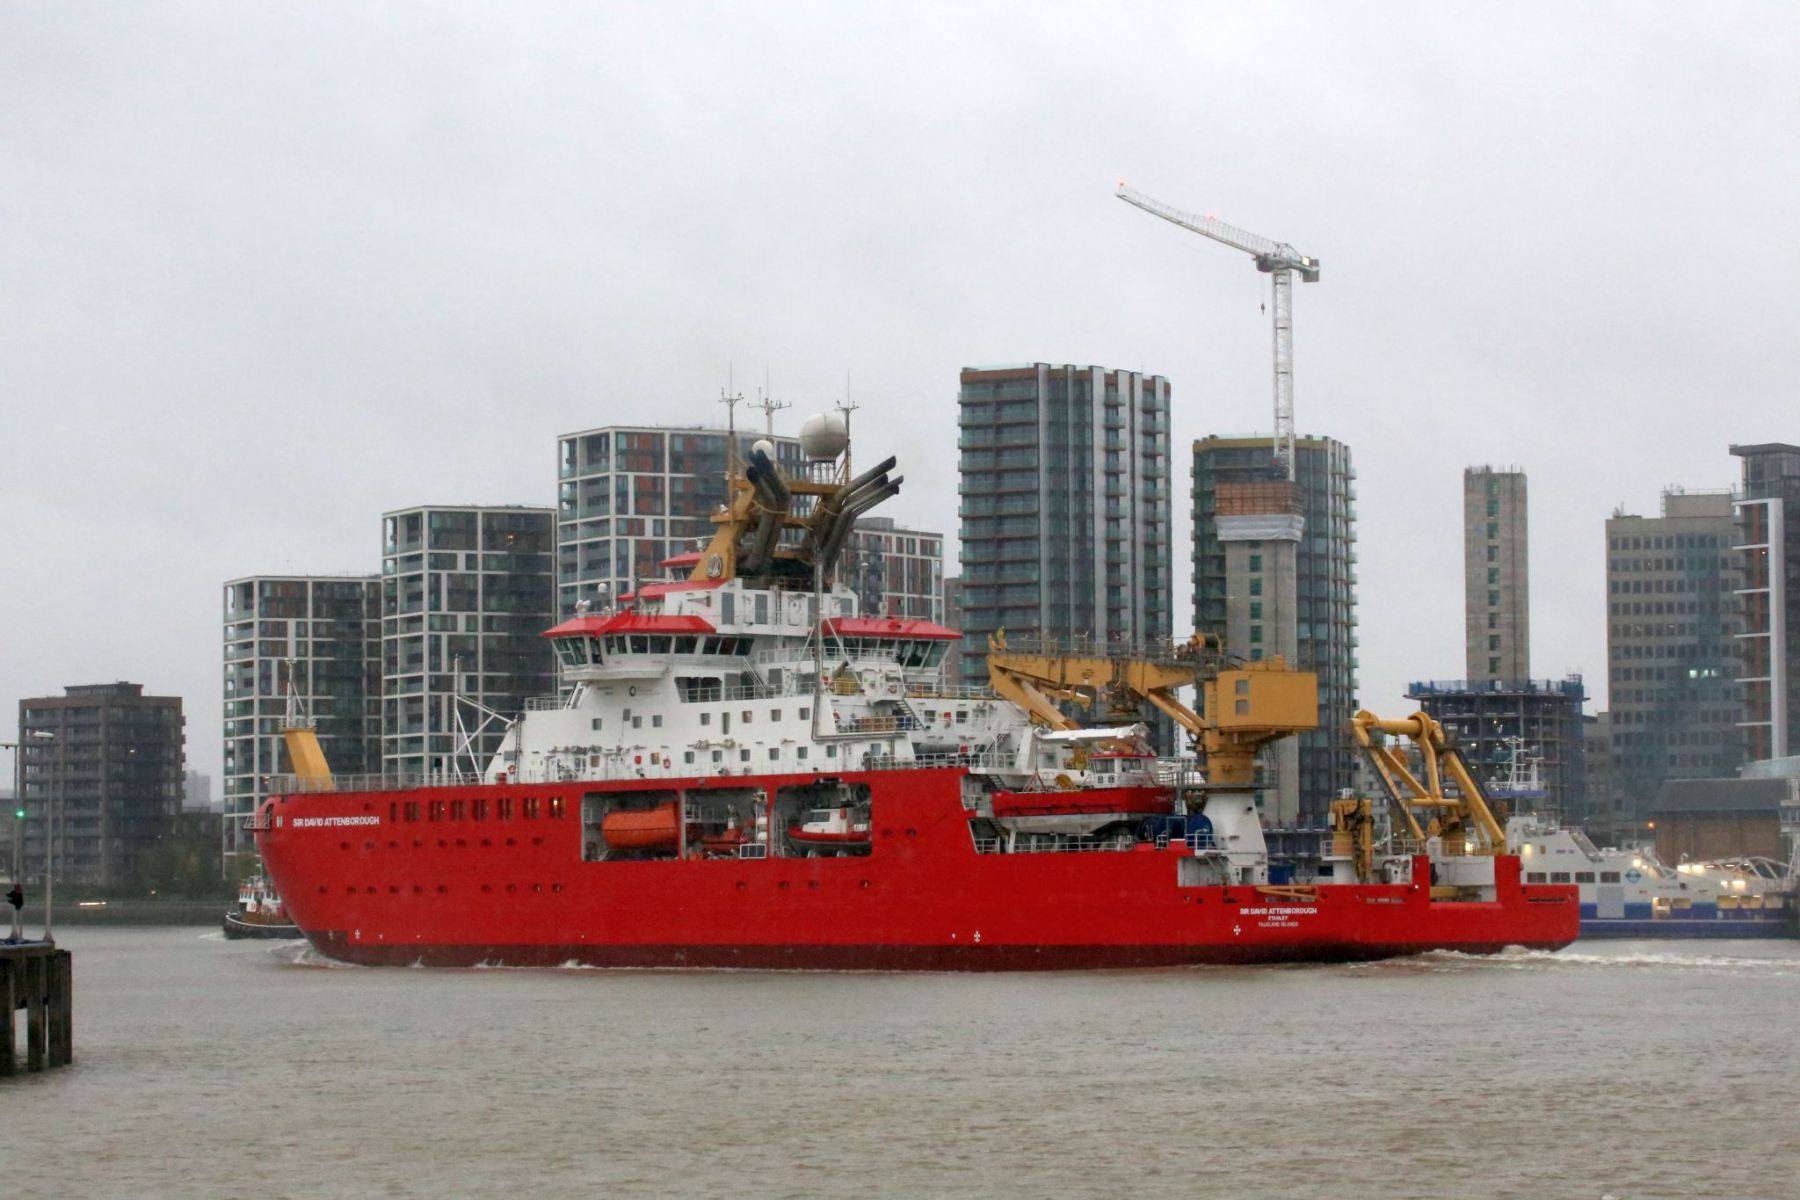 RRS Sir David Attenborough passing Woolwich, London on the River Thames heading out to sea.